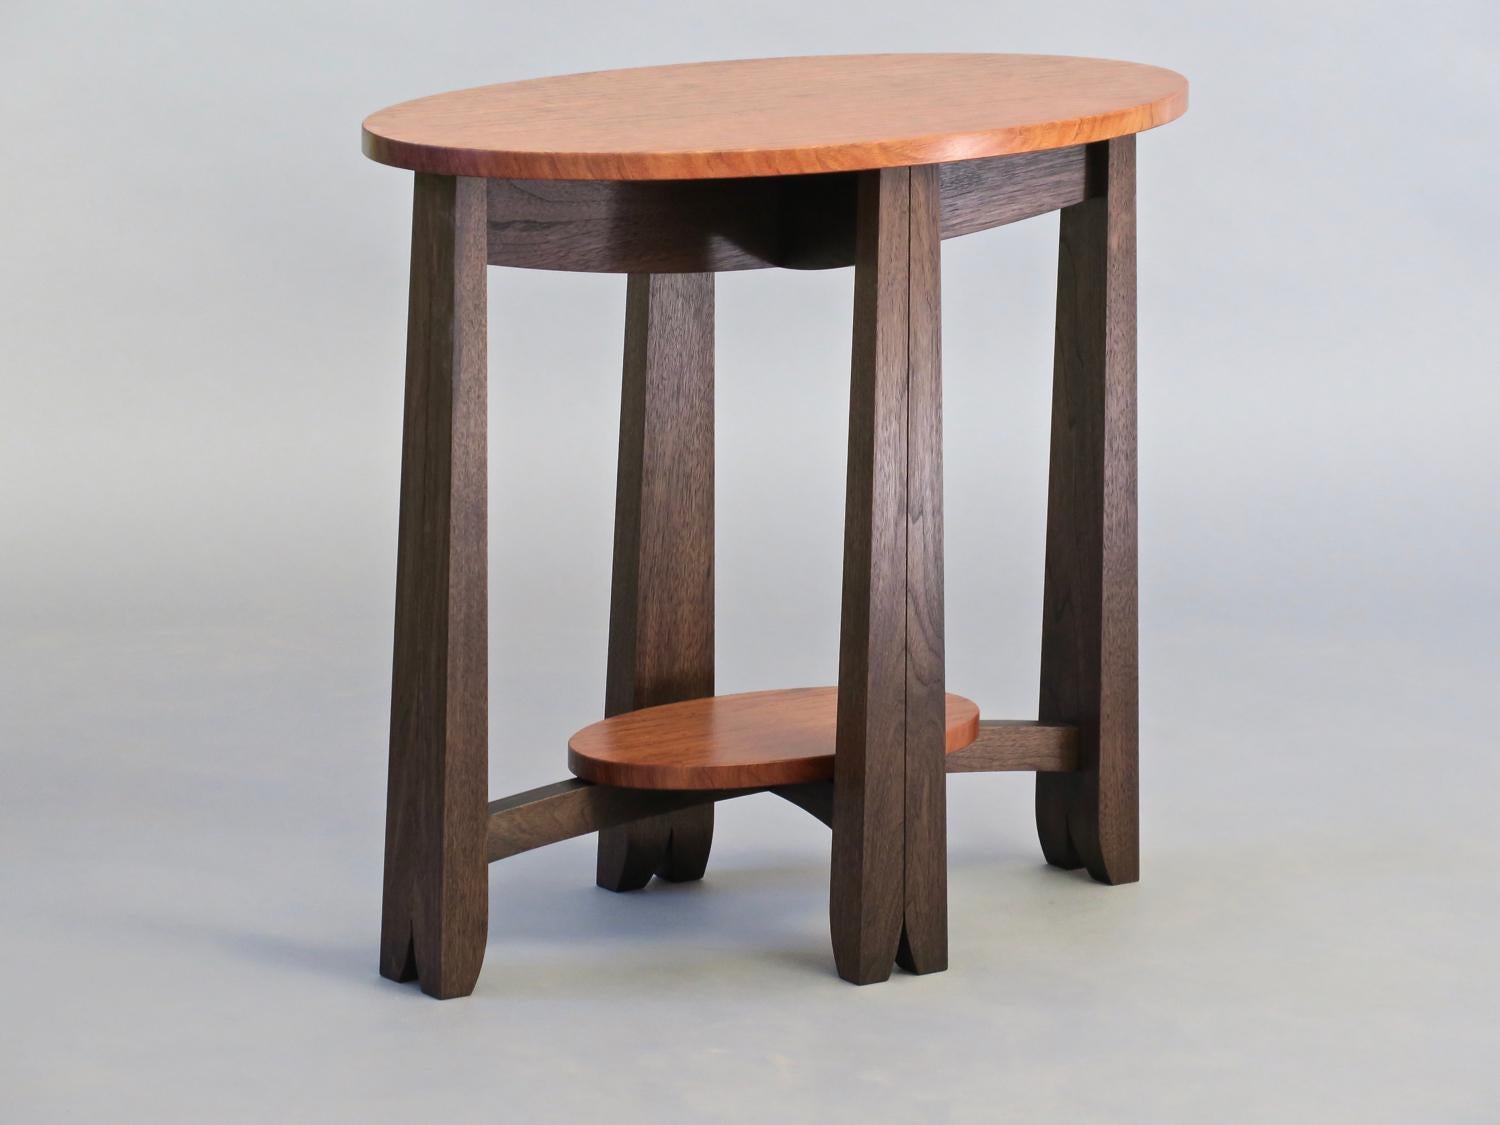 The oval Capistrano side table in blackened walnut and a contrasting figured bubinga top measures 28